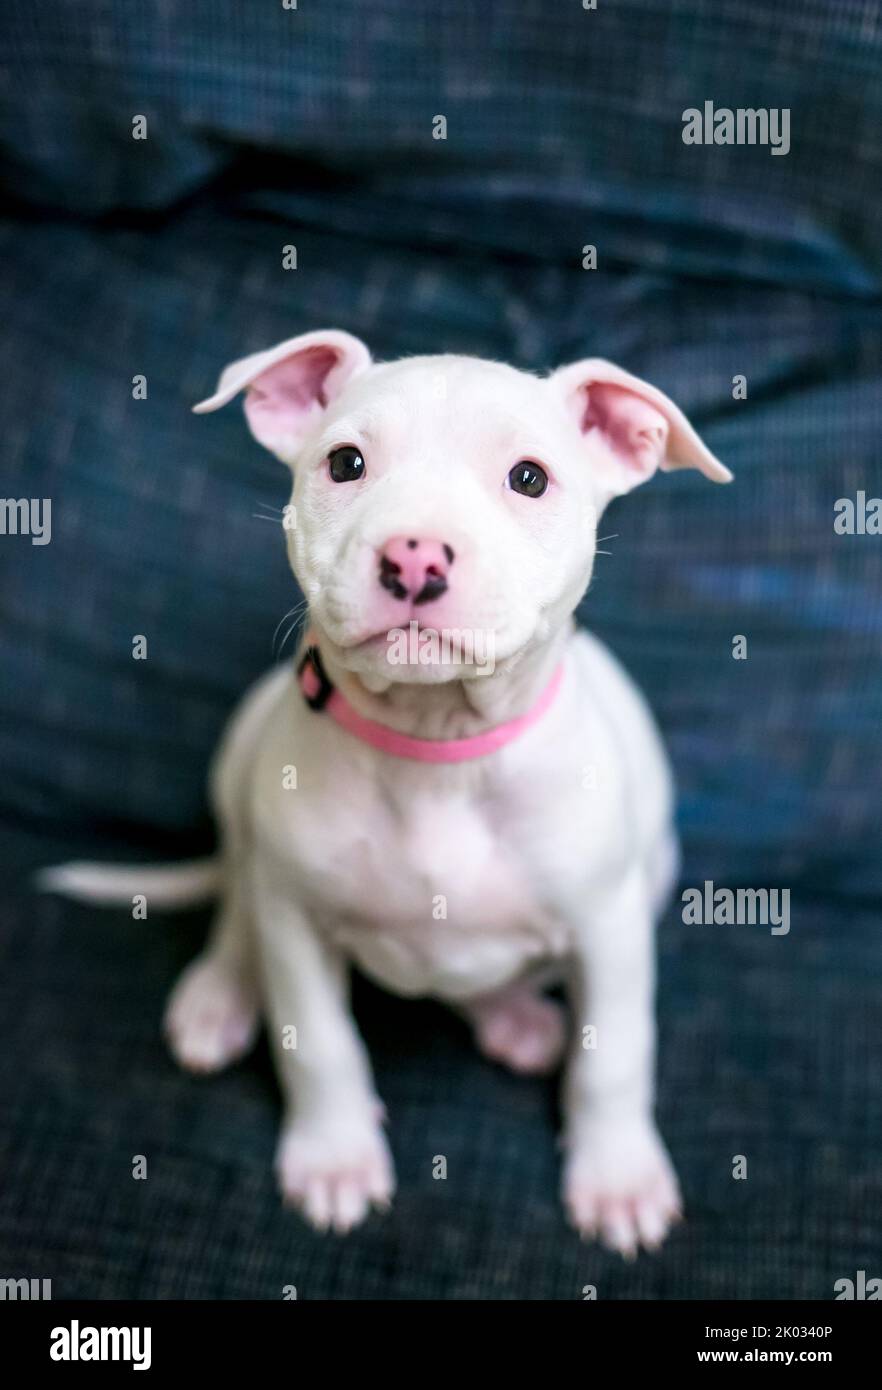 A white mixed breed puppy sitting on a couch and looking up at the camera Stock Photo